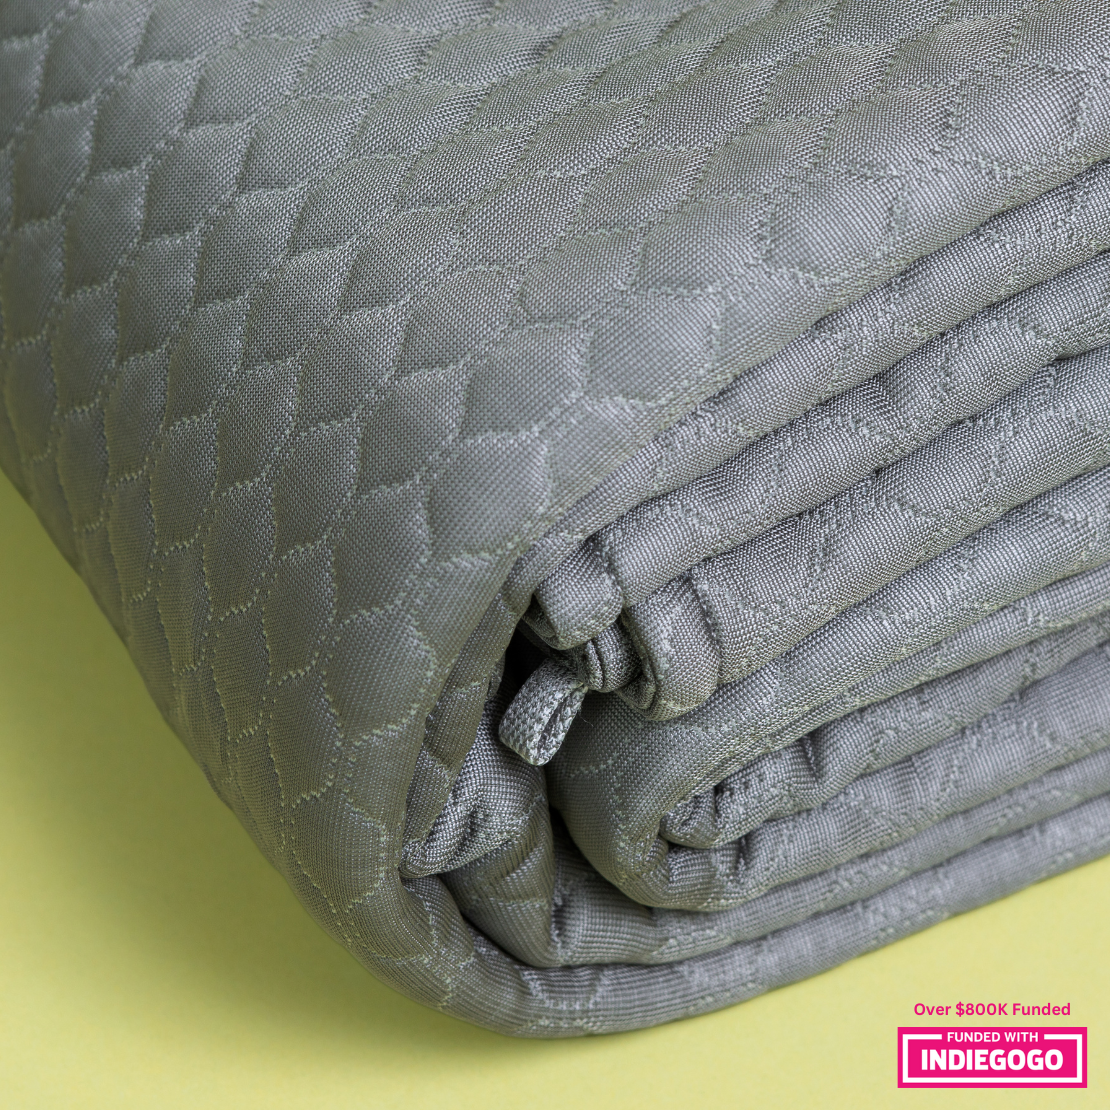 Close-up view of a silver-gray quilted blanket with a textured diamond pattern, neatly folded to showcase its intricate design against a pale yellow background.